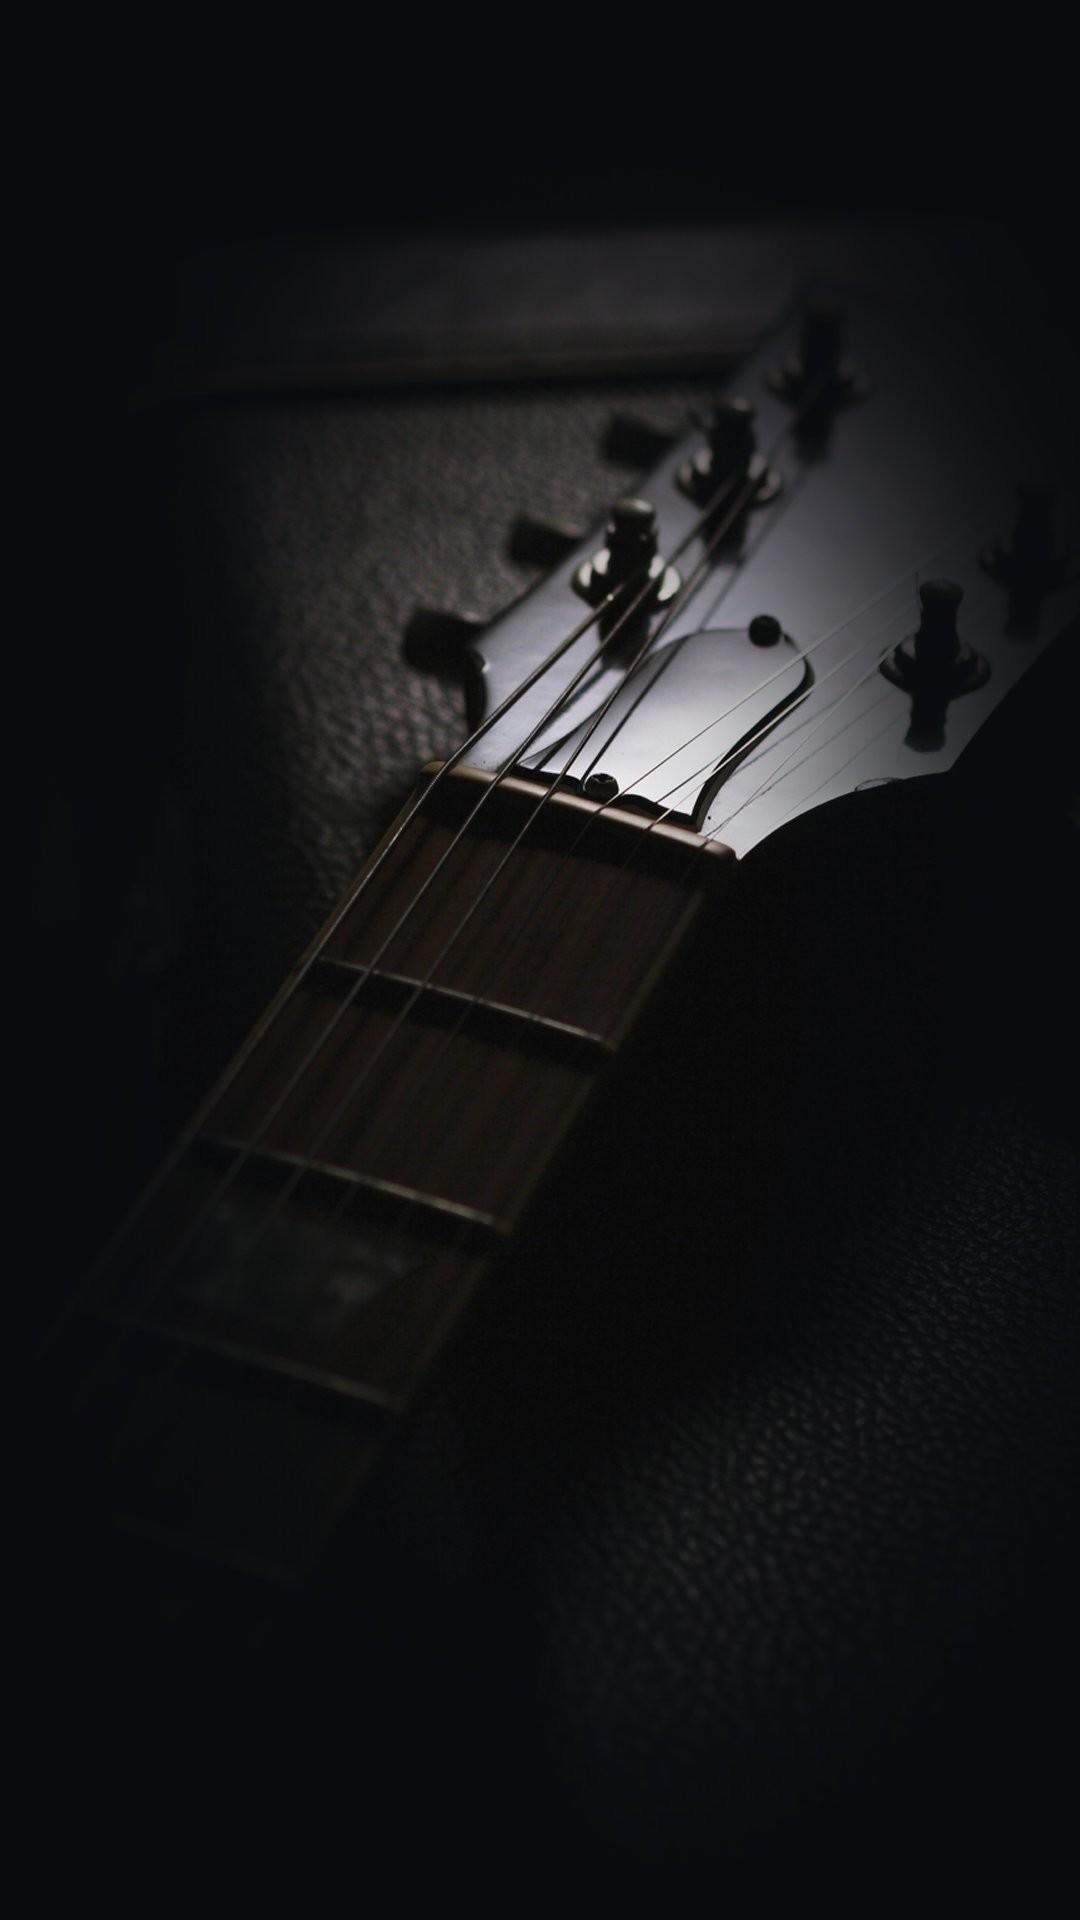 aesthetic guitar wallpapers wallpaper cave on aesthetic guitar wallpapers